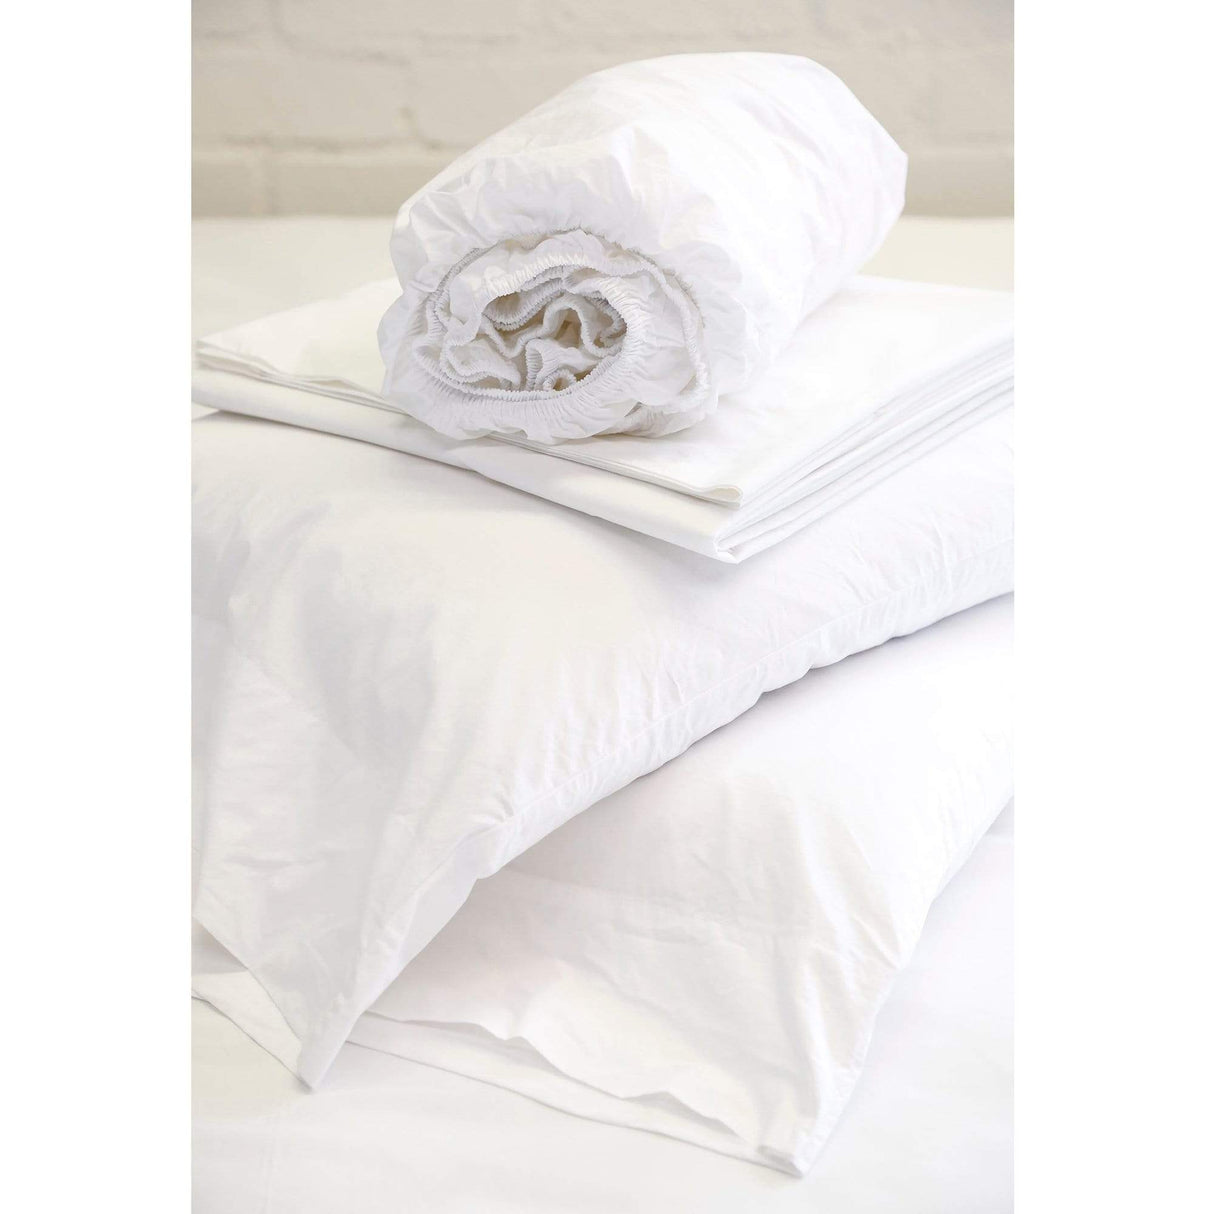 Pom Pom at Home Cotton Percale Sheet Set - White Bedding and Bath